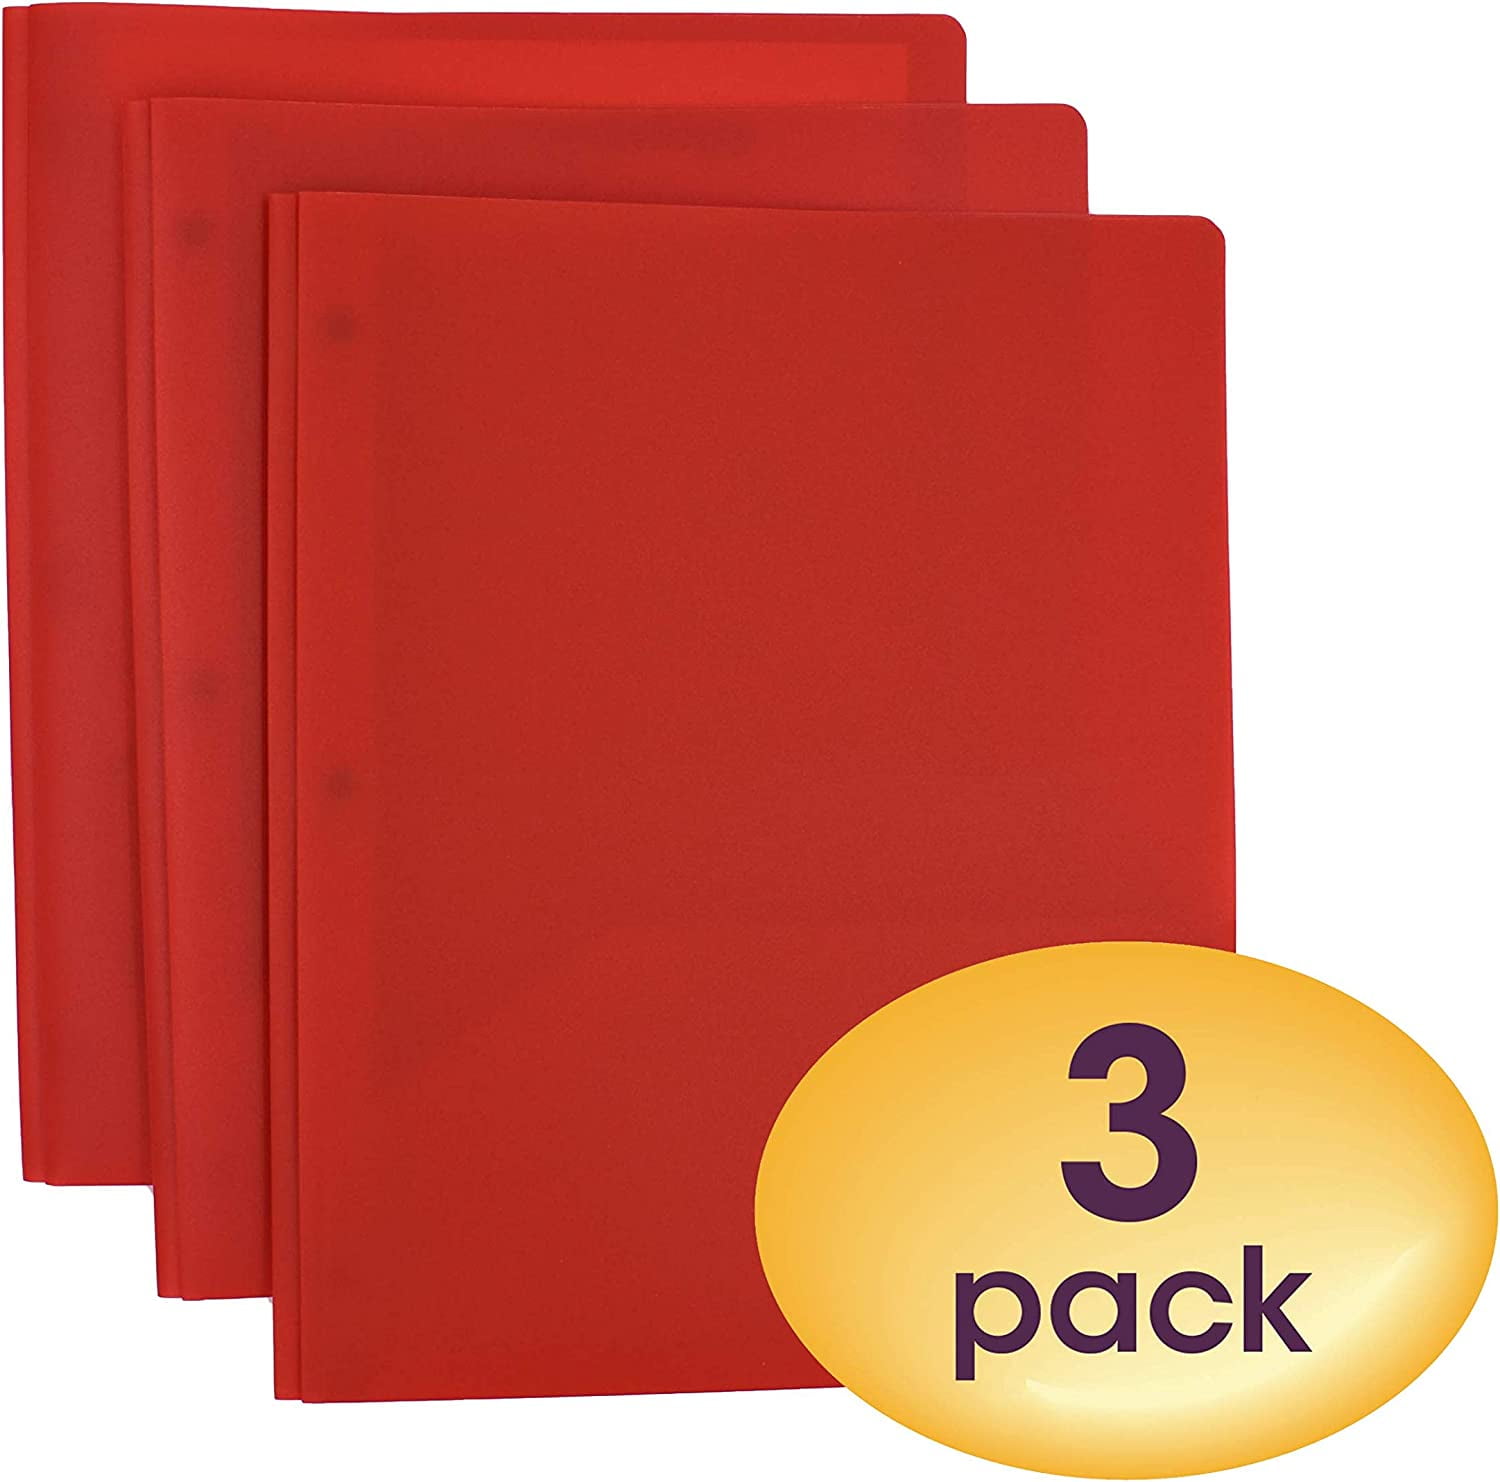 NEW GENERATION for School Home Poly Plastic Black 2 Pocket POP Folders with 3 Holes Punched Work and Storage 3 Pack Heavy Duty for Letter Size Papers Includes Business Card Slot Office 